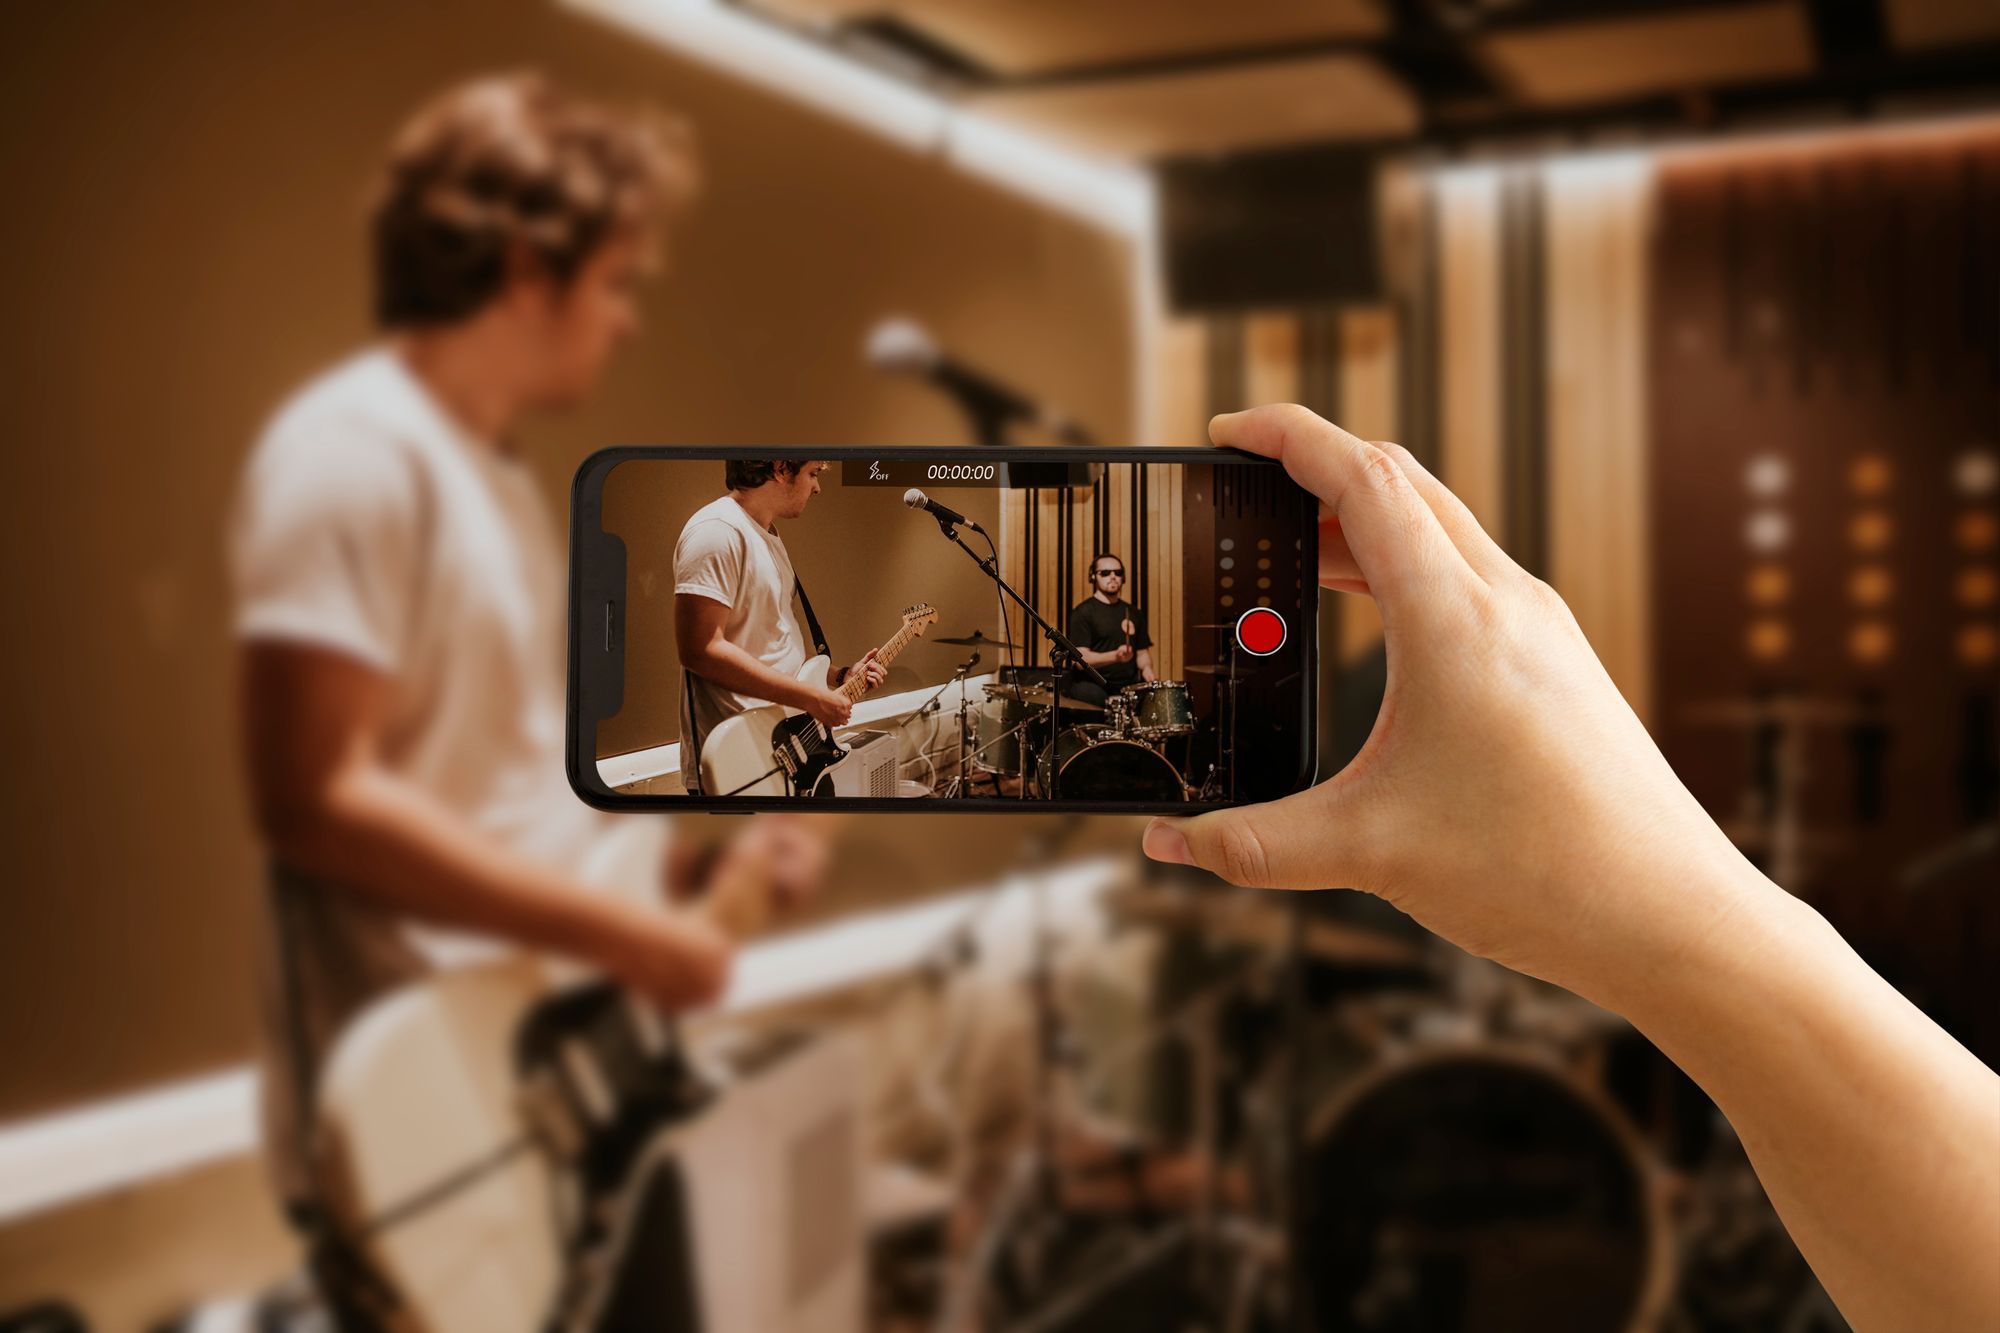 Better Understand the Recording Process in 8 Steps